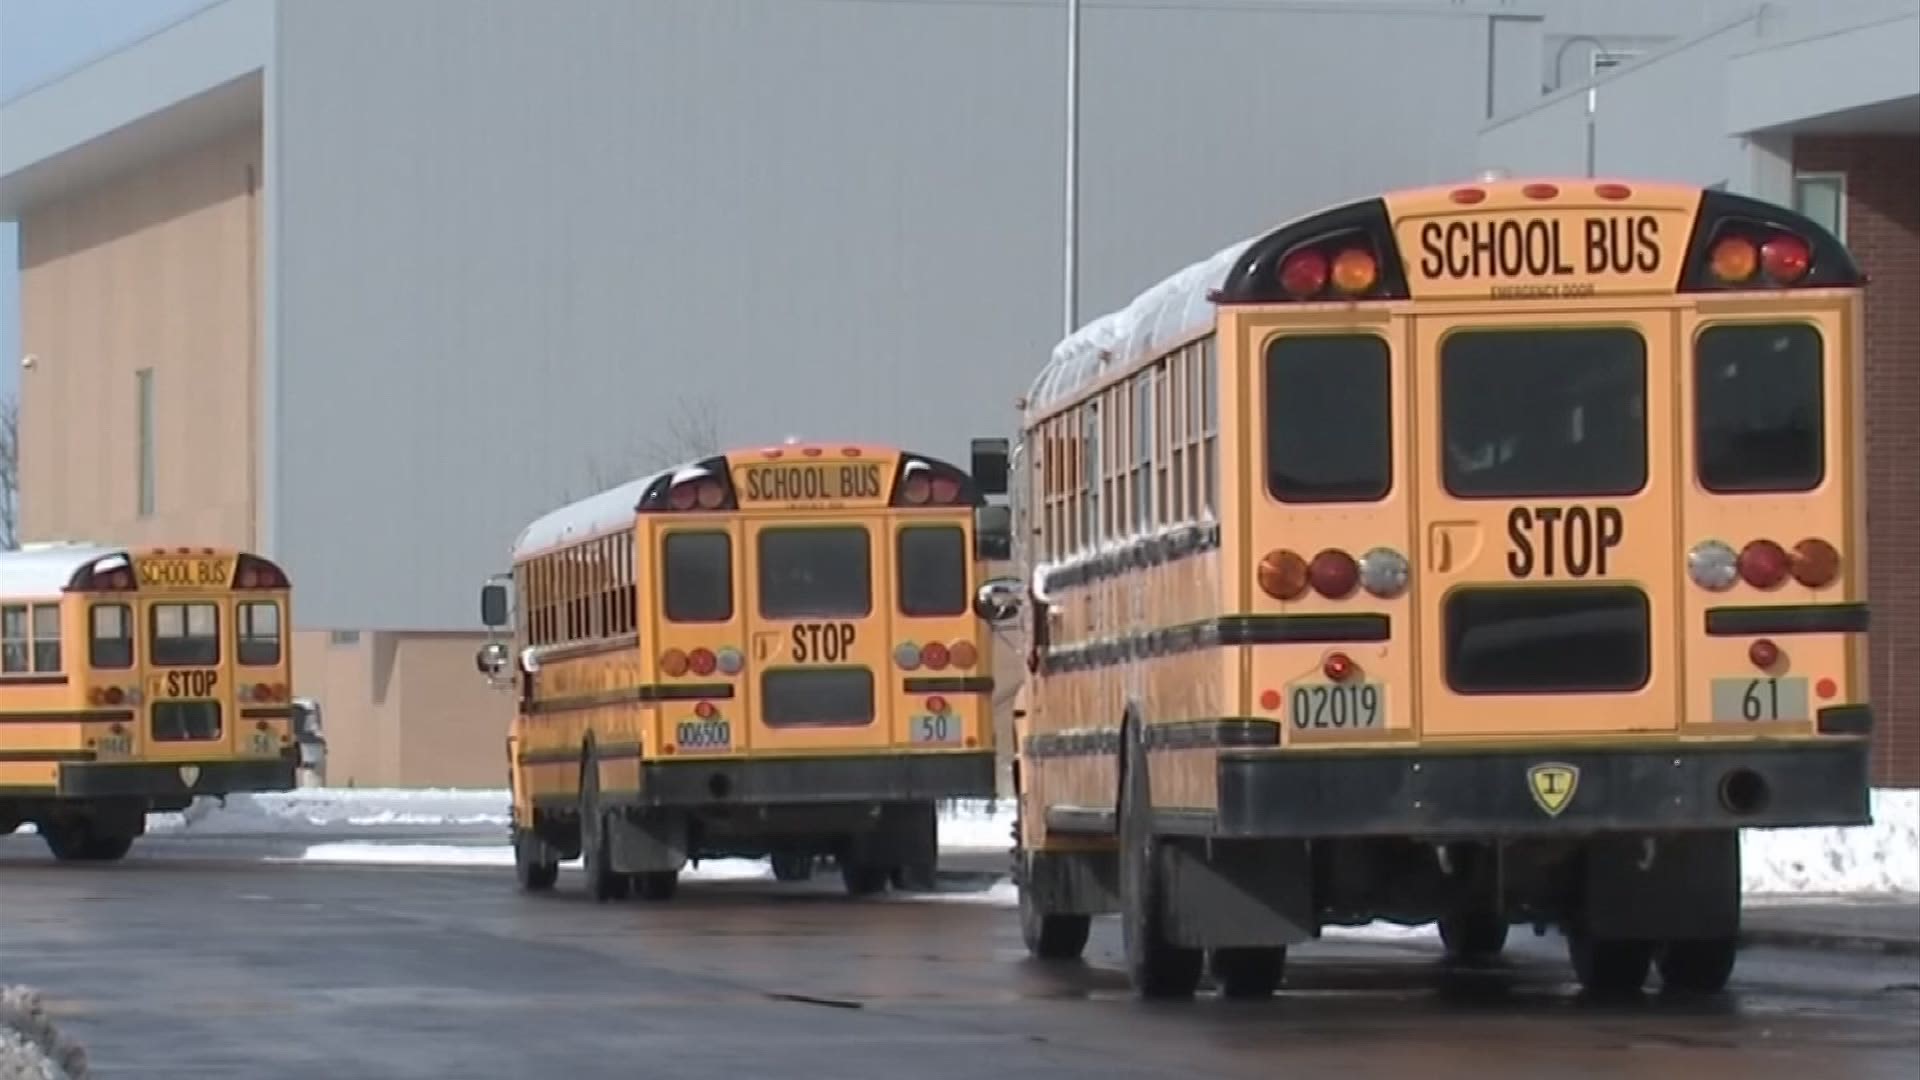 Hilliard City Schools says they have worked out an agreement with Reynoldsburg City Schools to borrow some of its bus drivers.